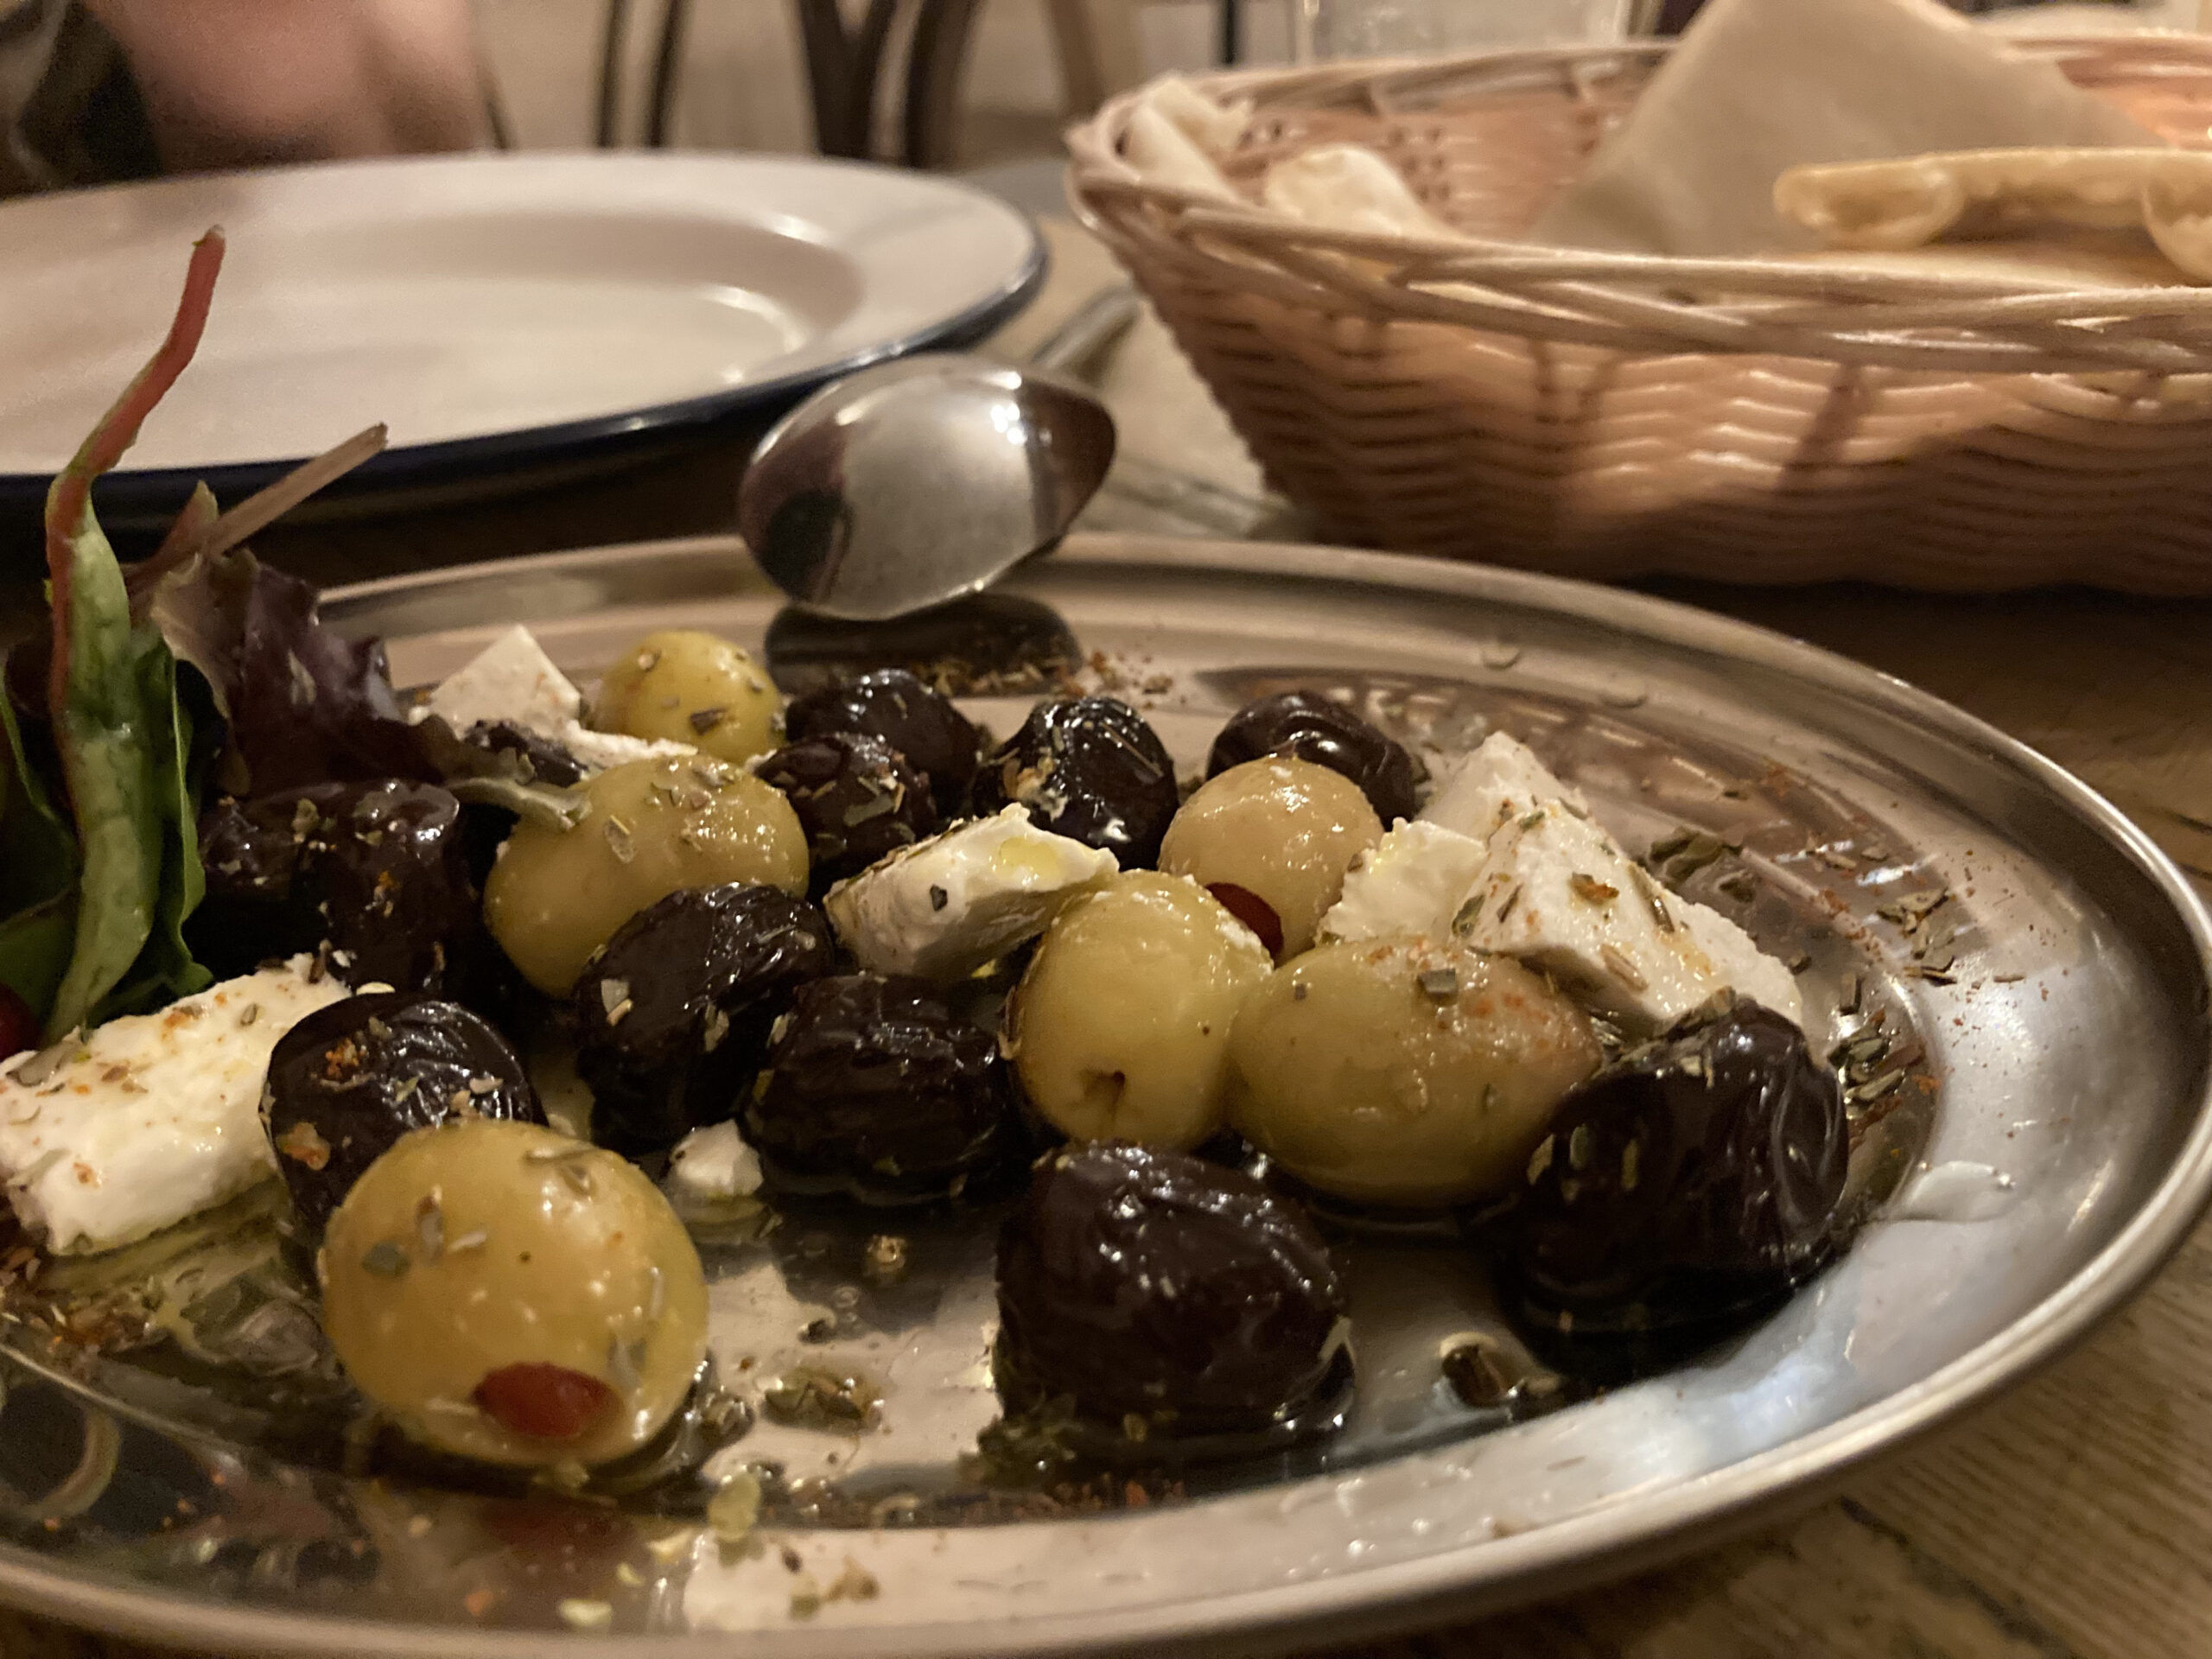 a selection of pimento-stuffed green olives, black olives and a silky feta cheese